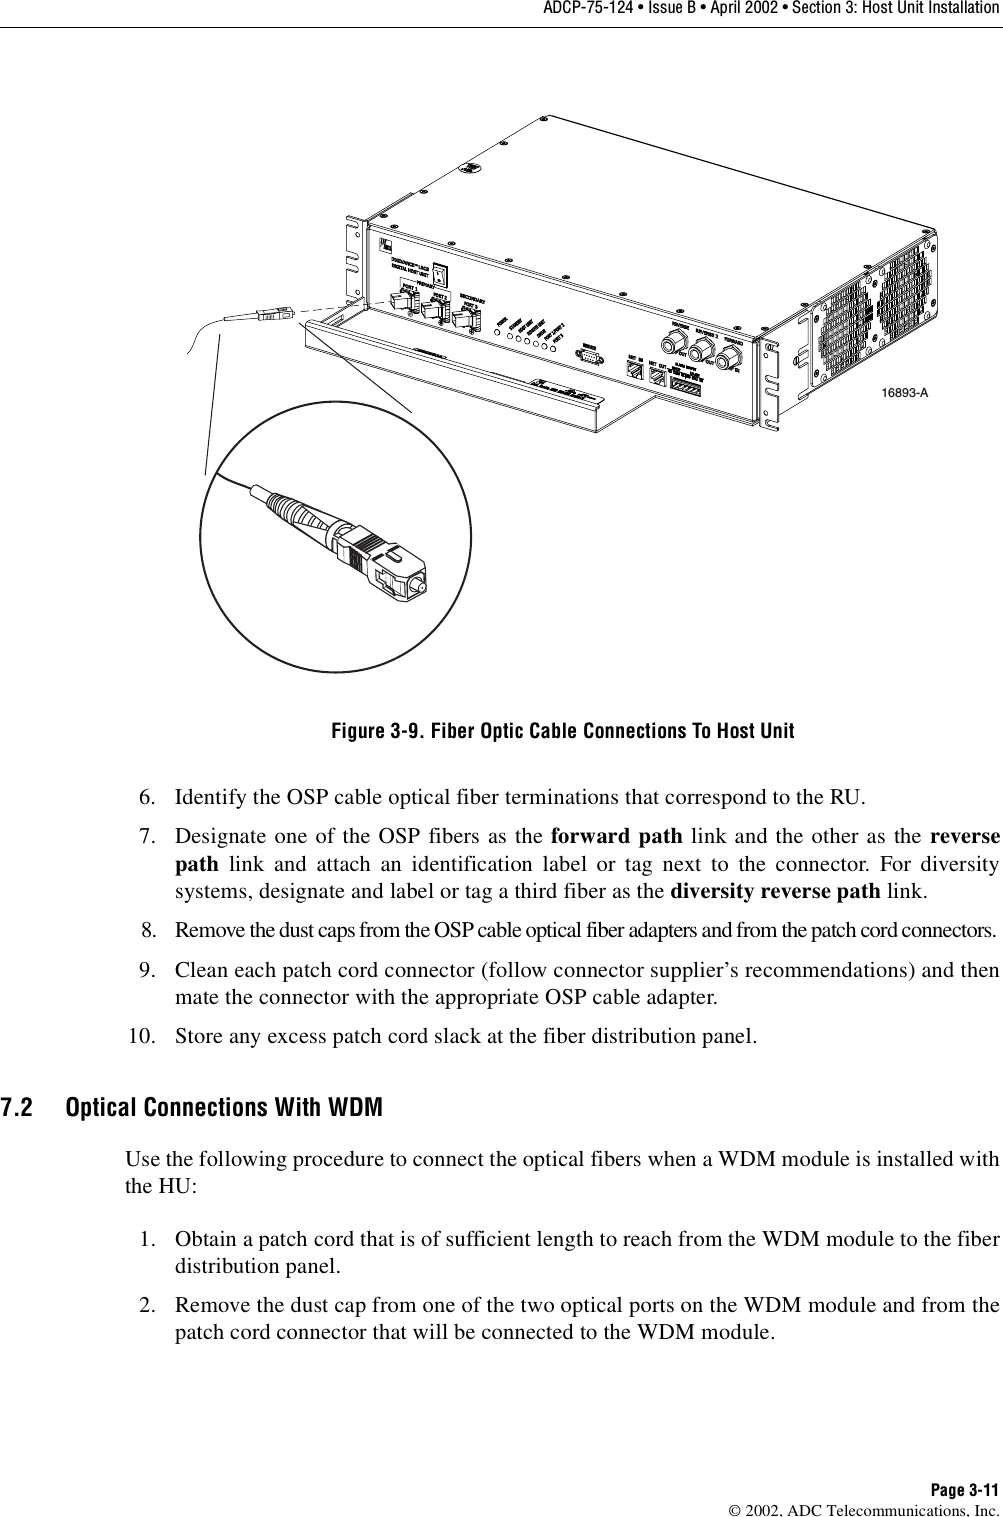 ADCP-75-124 • Issue B • April 2002 • Section 3: Host Unit InstallationPage 3-11©2002, ADC Telecommunications, Inc.Figure 3-9. Fiber Optic Cable Connections To Host Unit6. Identify the OSP cable optical fiber terminations that correspond to the RU.7. Designate one of the OSP fibers as the forward path link and the other as the reversepath link and attach an identification label or tag next to the connector. For diversitysystems, designate and label or tag athird fiber as the diversity reverse path link.8. Remove the dust caps from the OSP cable optical fiber adapters and from the patch cord connectors.9. Clean each patch cord connector (follow connector supplier’s recommendations) and thenmate the connector with the appropriate OSP cable adapter.10. Store any excess patch cord slack at the fiber distribution panel.7.2 Optical Connections With WDMUse the following procedure to connect the optical fibers when aWDM module is installed withthe HU:1. Obtain apatch cord that is of sufficient length to reach from the WDM module to the fiberdistribution panel.2. Remove the dust cap from one of the two optical ports on the WDM module and from thepatch cord connector that will be connected to the WDM module.16893-A